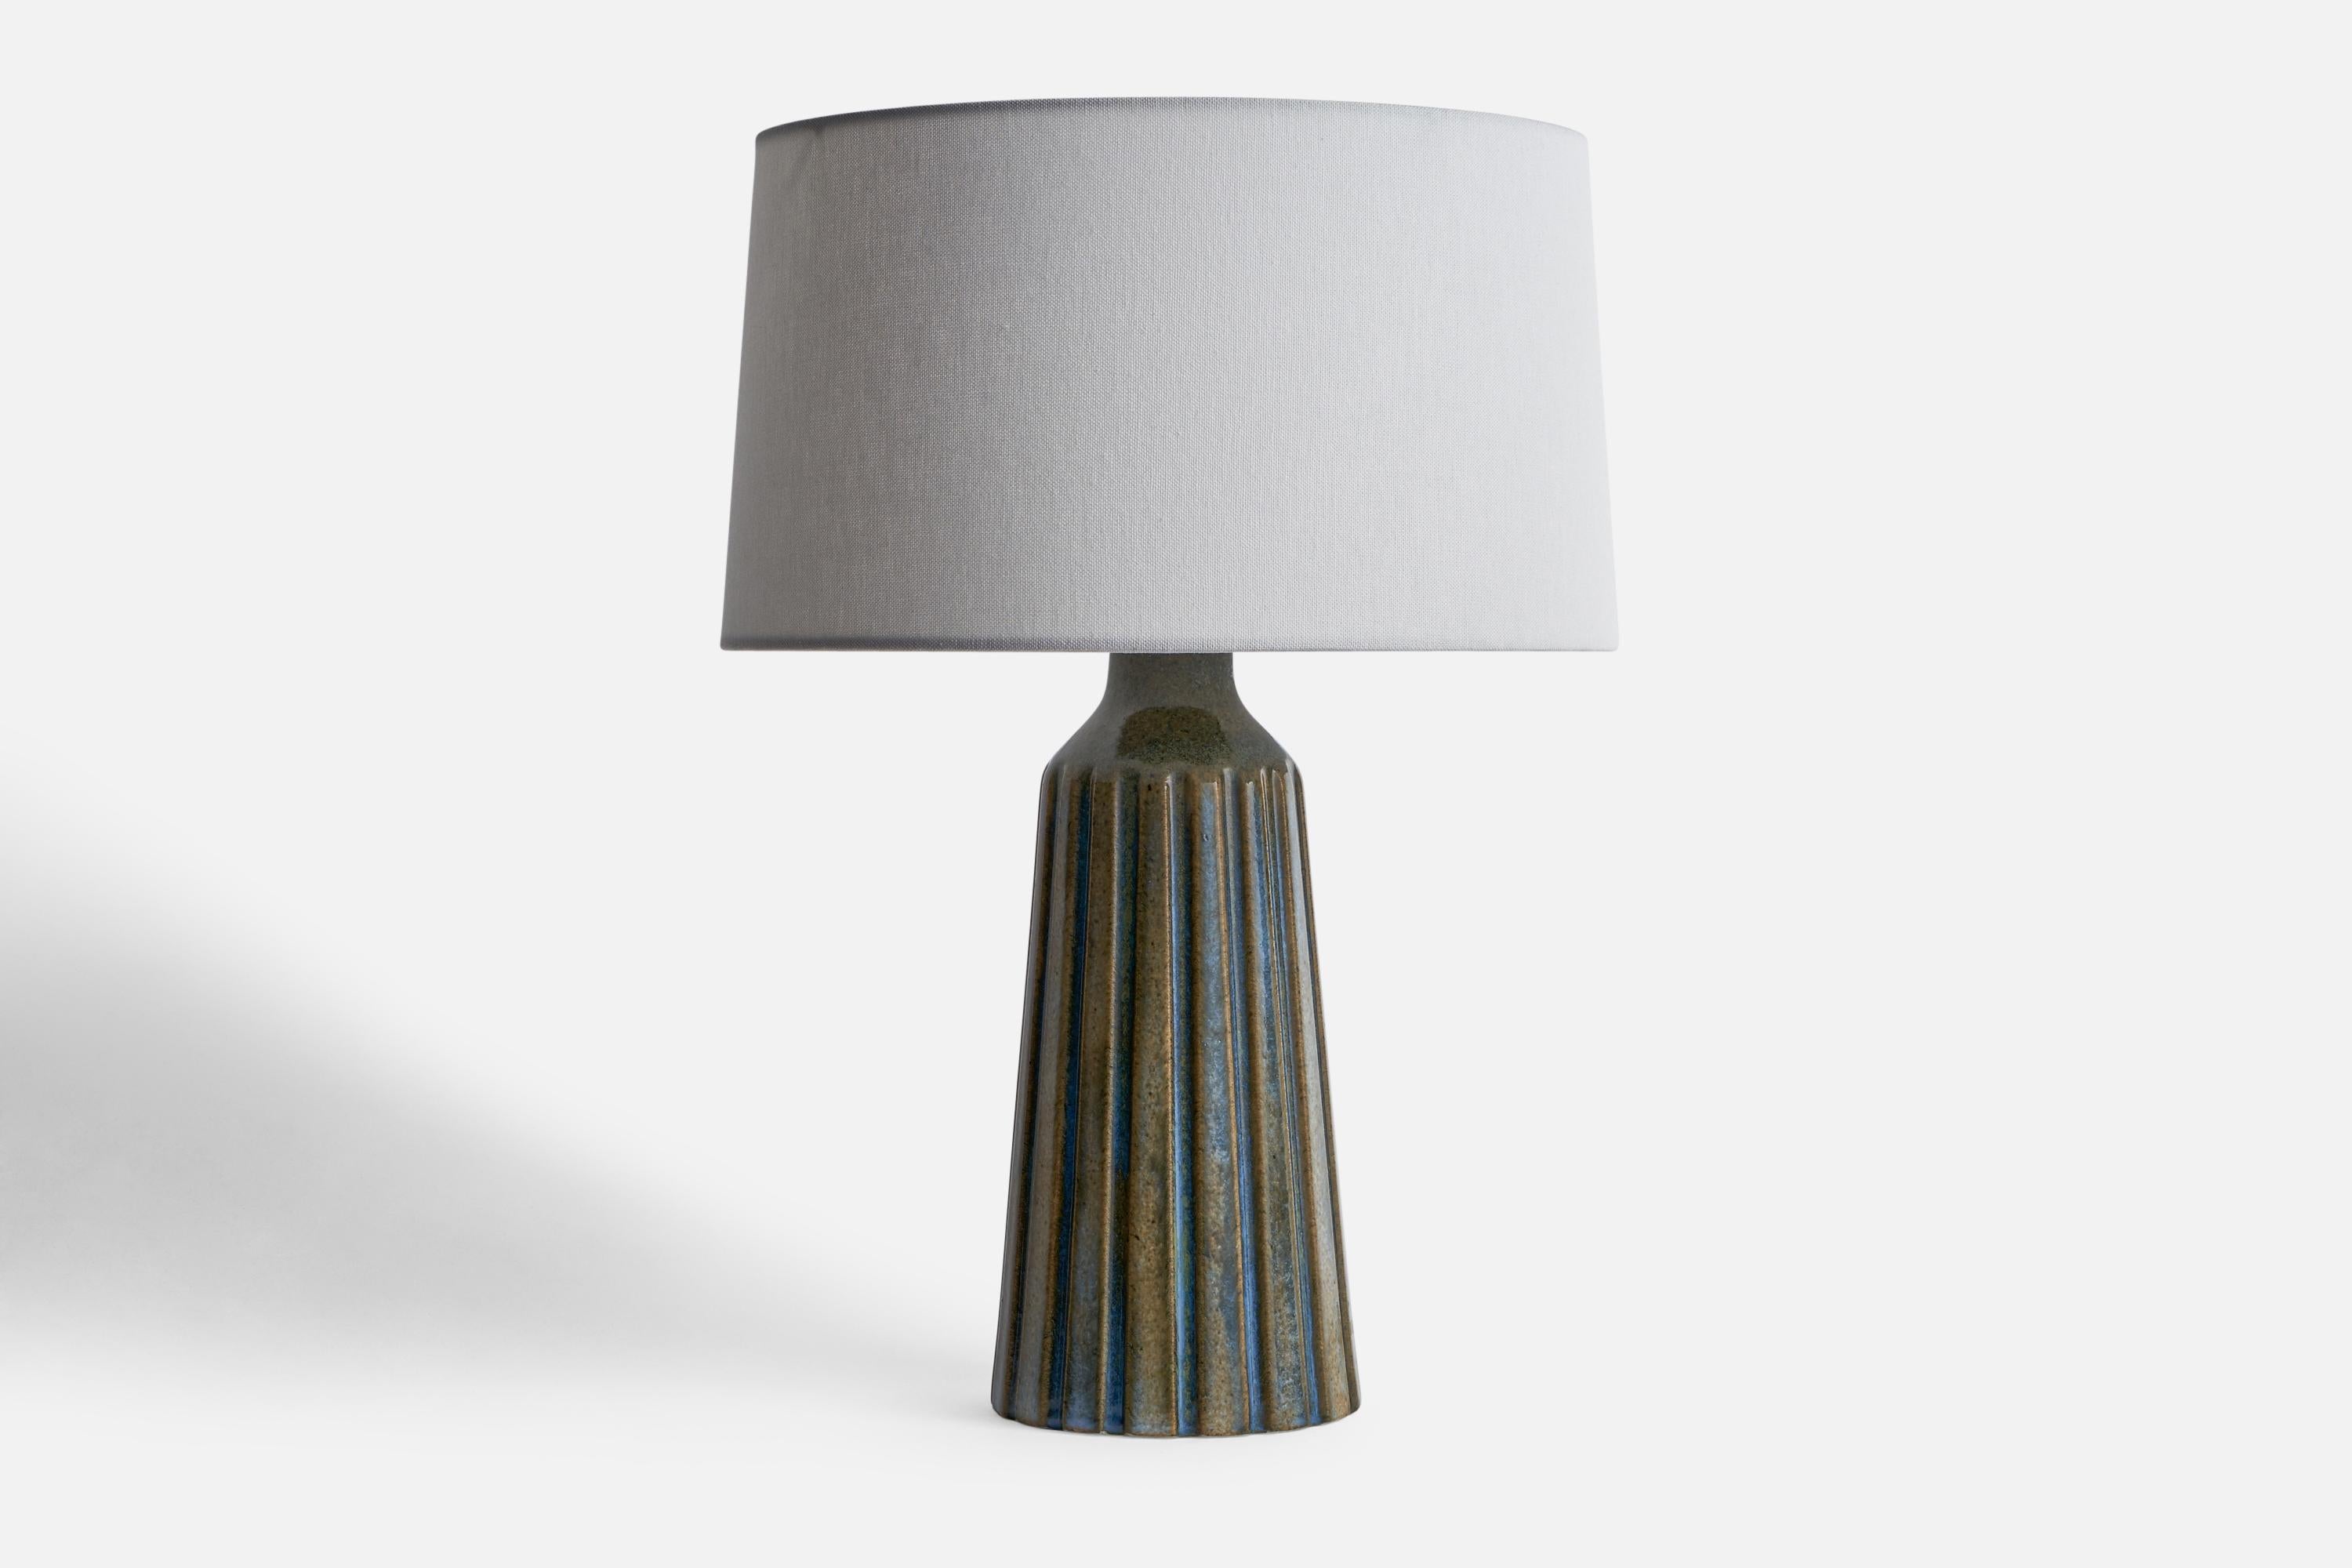 A blue and grey-glazed stoneware table lamp designed and produced by Ego Stengods, Sweden, 1960s.

Dimensions of Lamp (inches): 13.1” H x 5.05” Diameter
Dimensions of Shade (inches): 4.5” Top Diameter x 10” Bottom Diameter x 5.25” H
Dimensions of